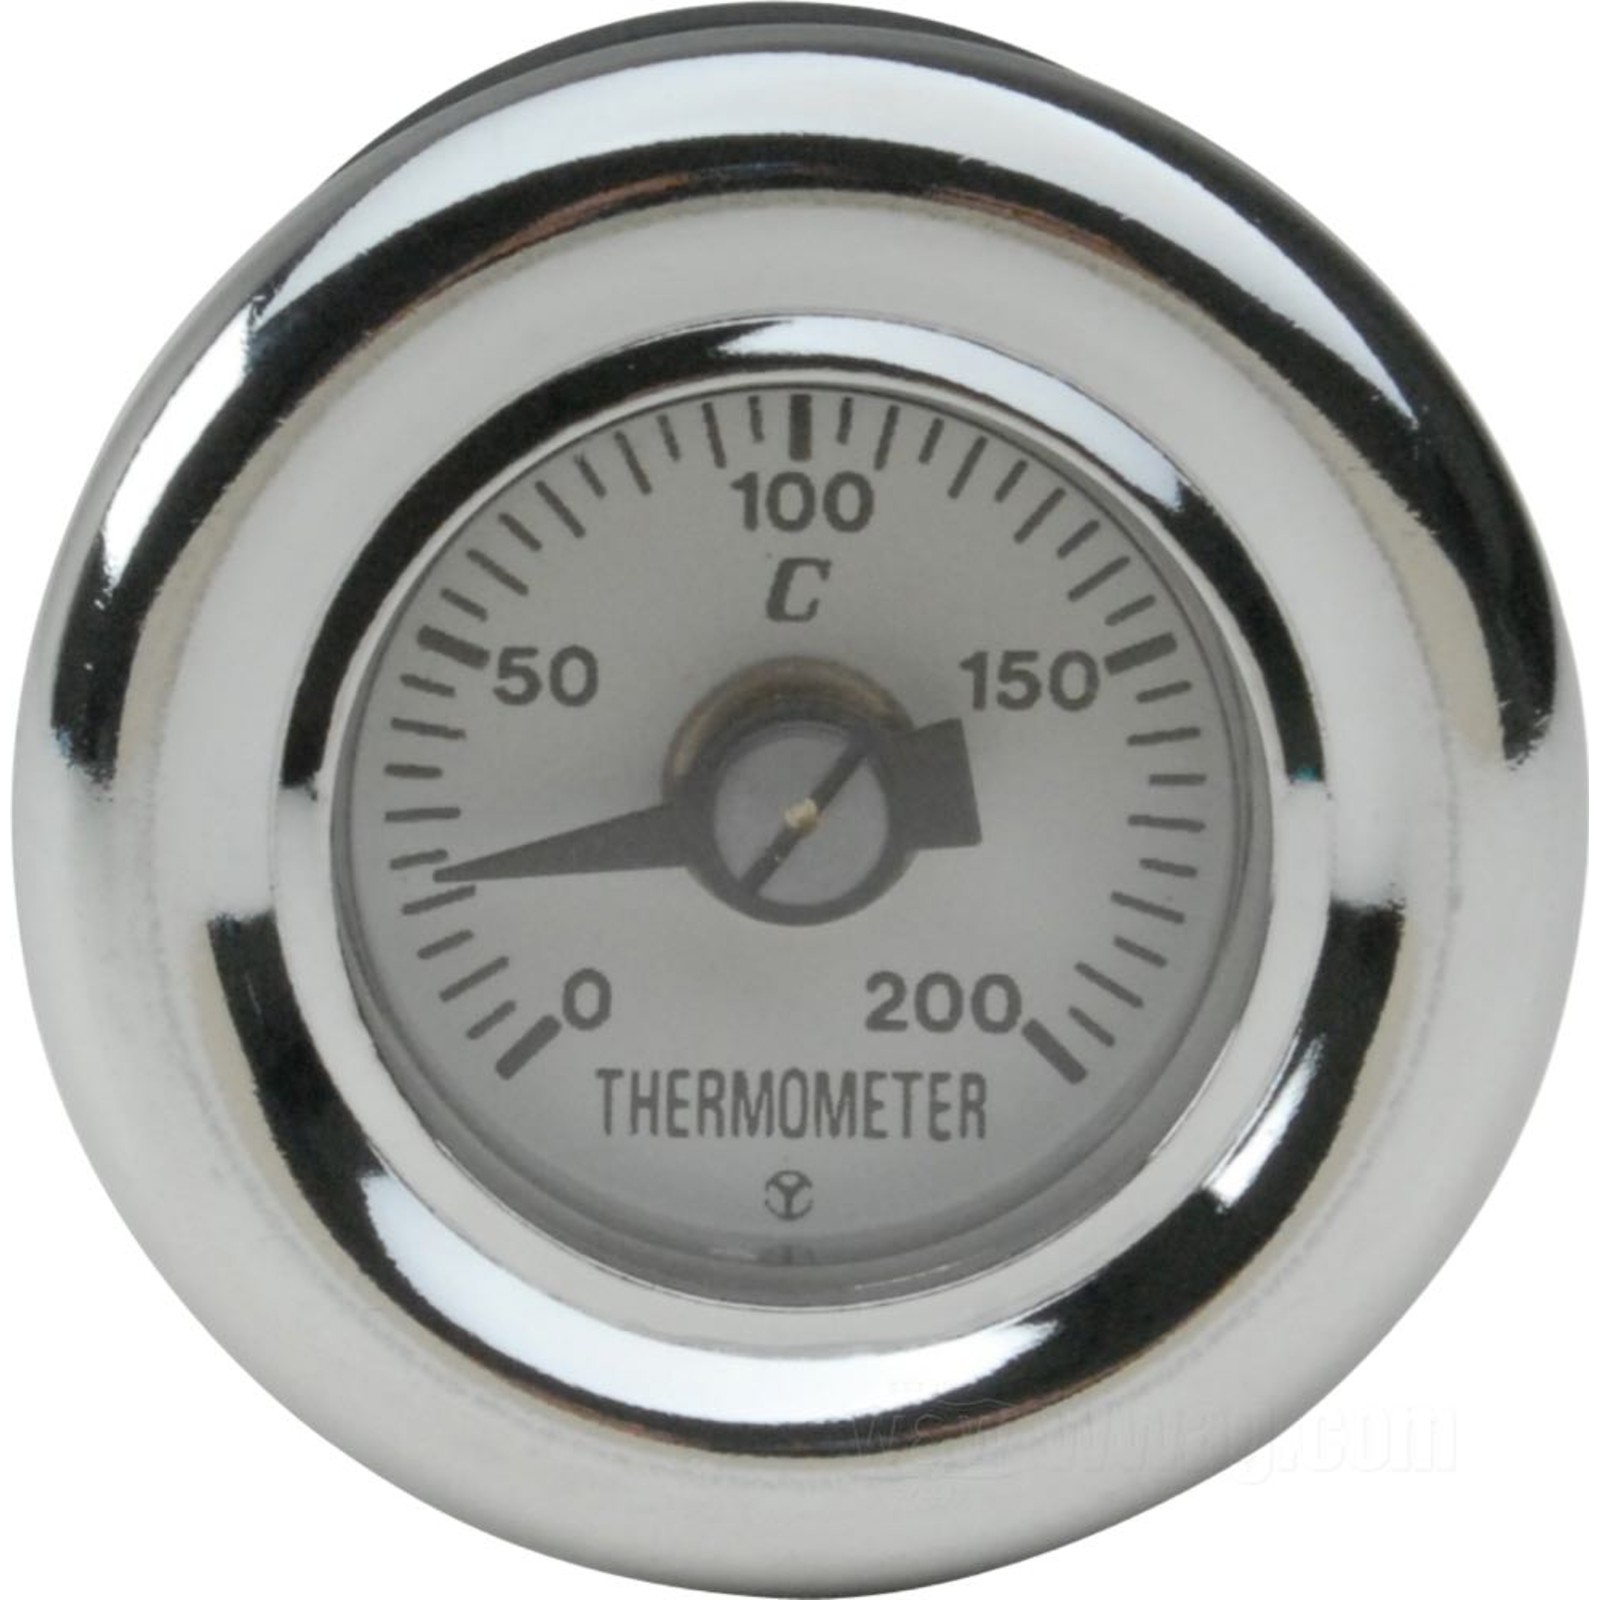 Oelthermometer